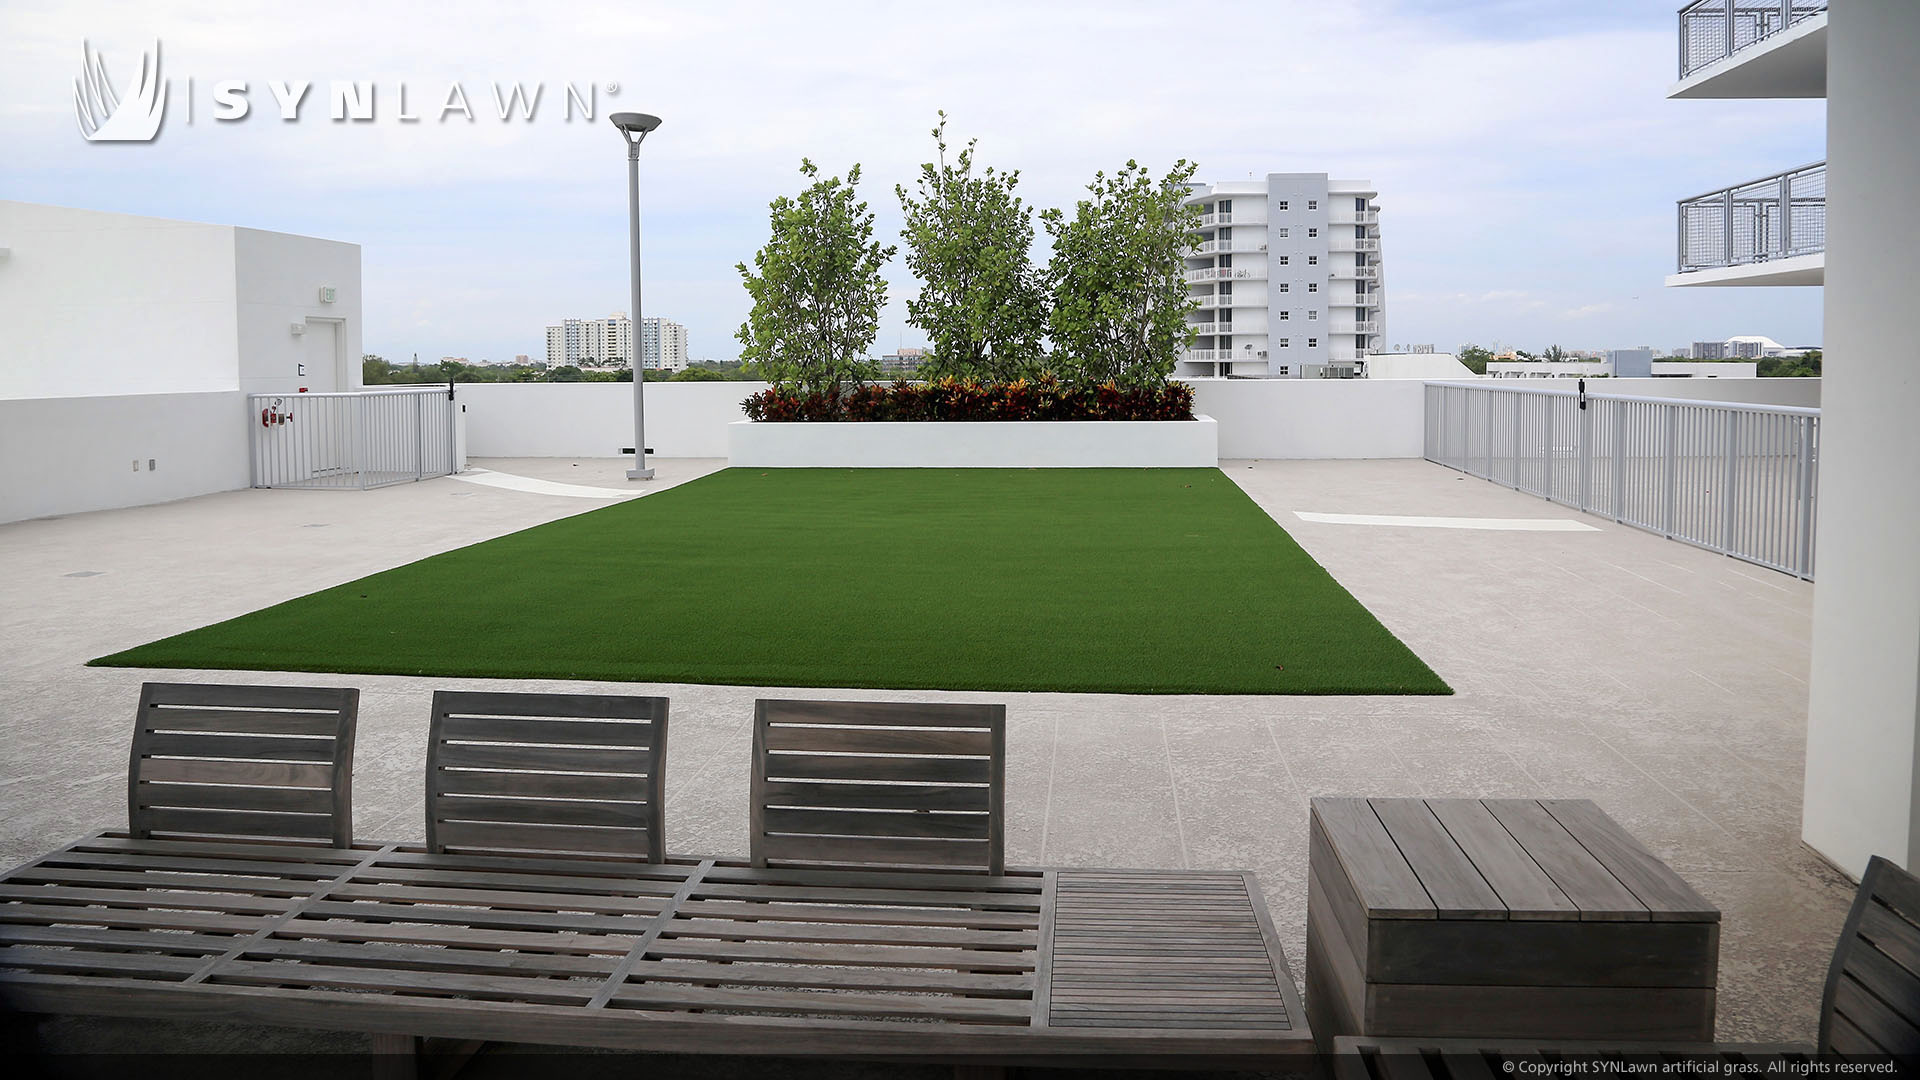 Commercial artificial grass rooftop from SYNlawn